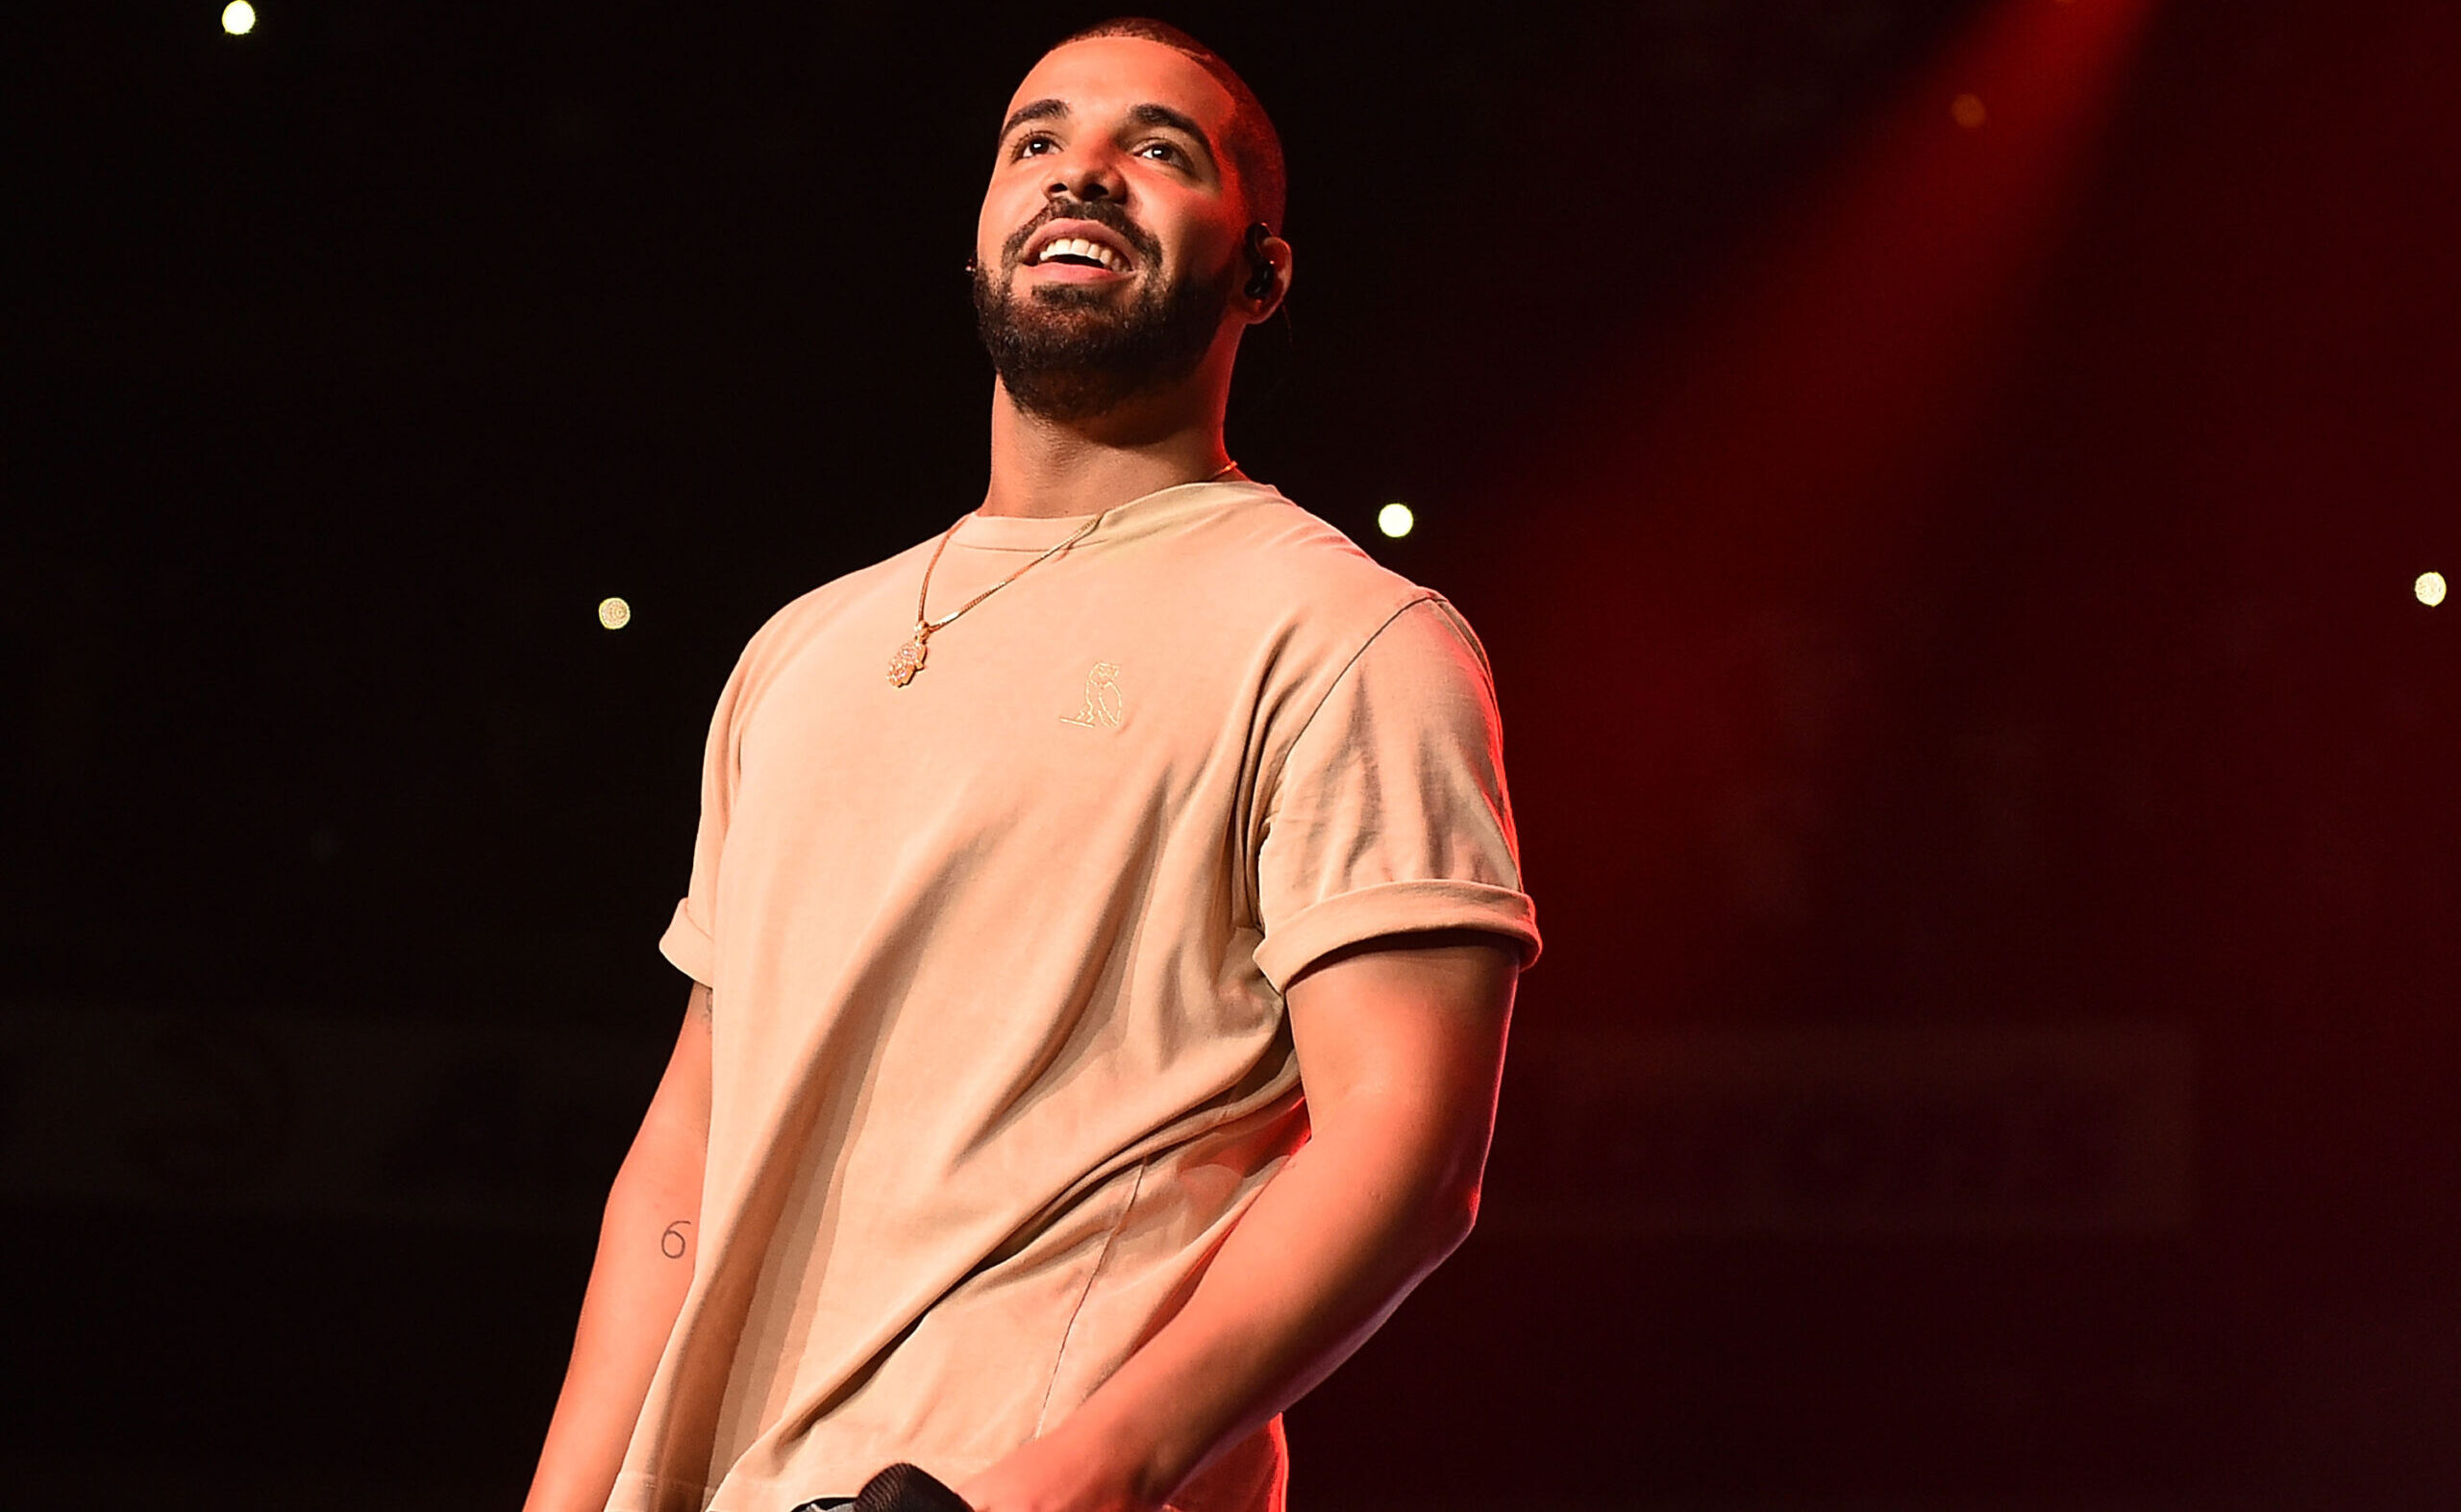 Drake tells fans at Houston concert he's moving to Texas